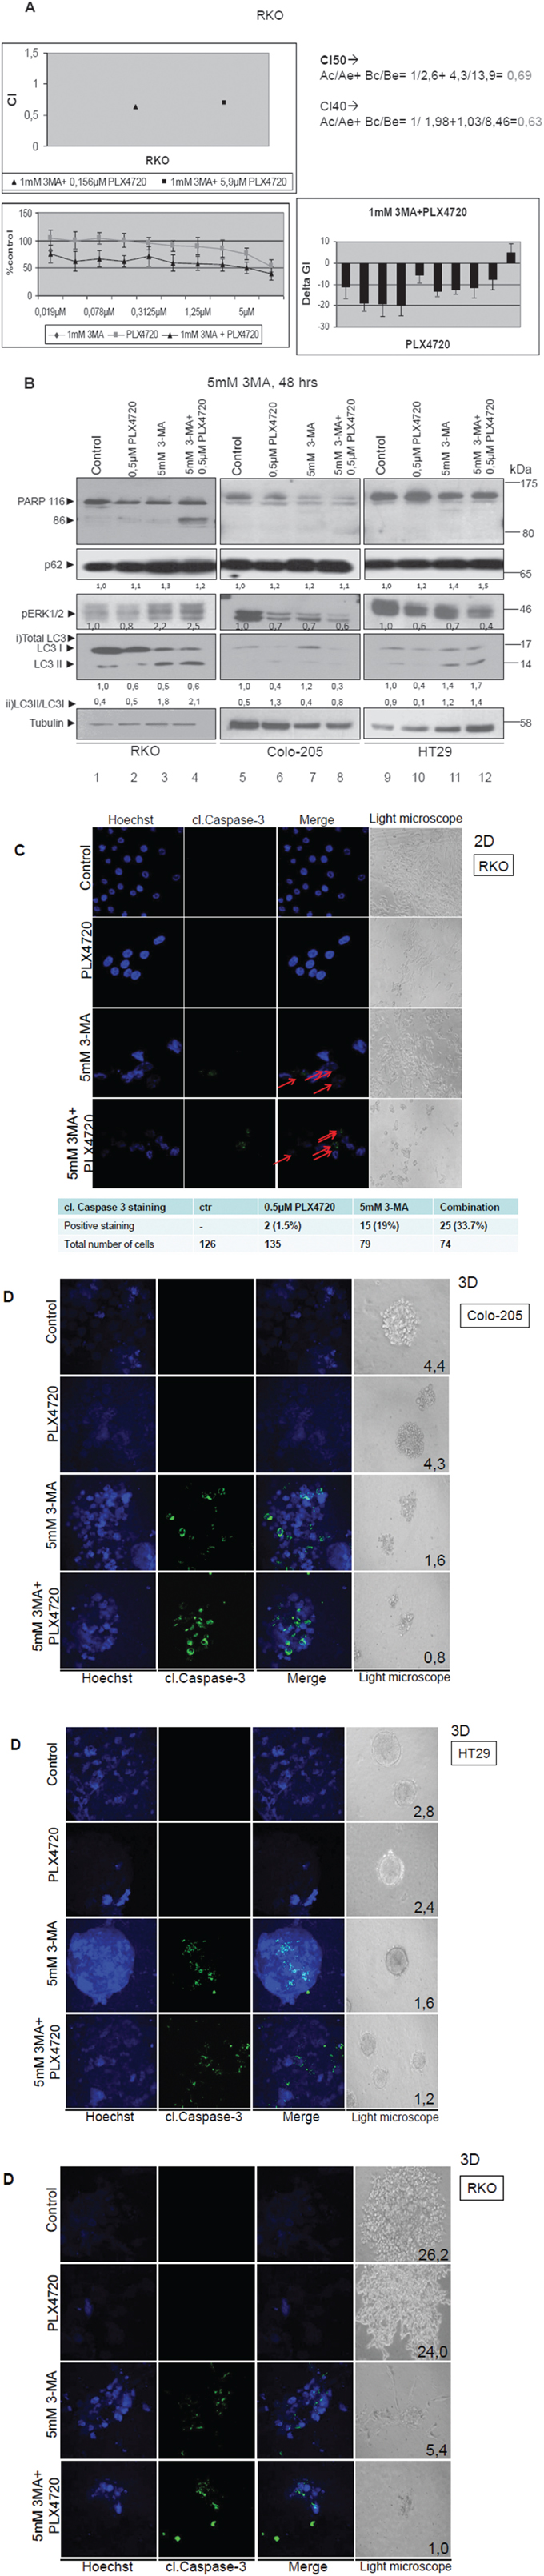 Autophagy-mediated resistance mechanism can be overcome by synergistic treatment of PLX4720 with 3-MA in BRAFV600E cells.